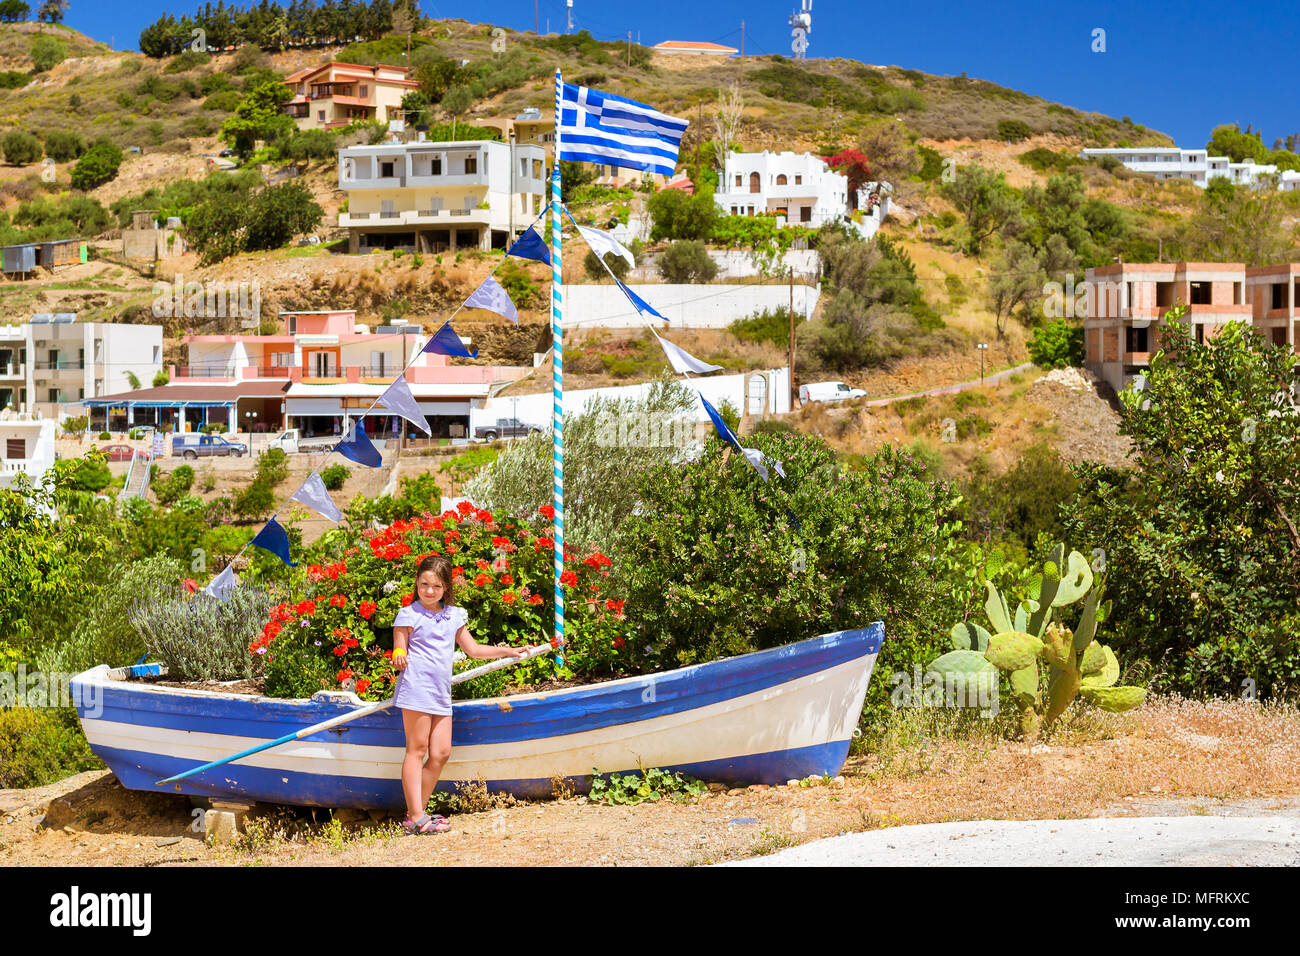 Girl with yellow lemon in hand posing against old fishing boat with Greek flag, stands on shore and decorated by flower bed. Tourist attraction Varkot Stock Photo